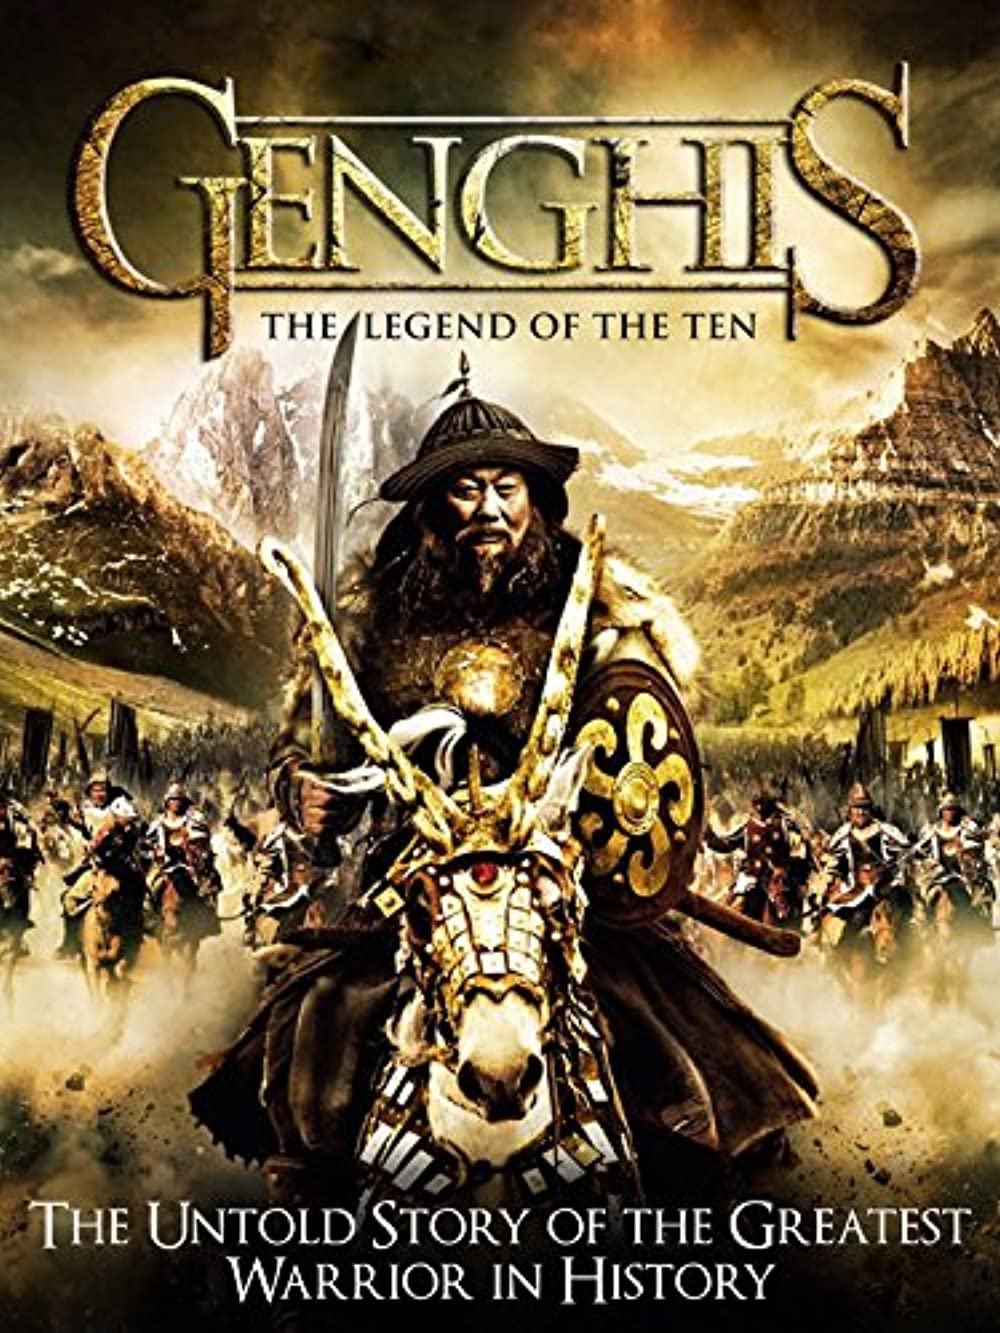 Genghis The Legend of the Ten 2012 Hindi ORG Dual Audio 300MB BluRay 480p ESubs Download